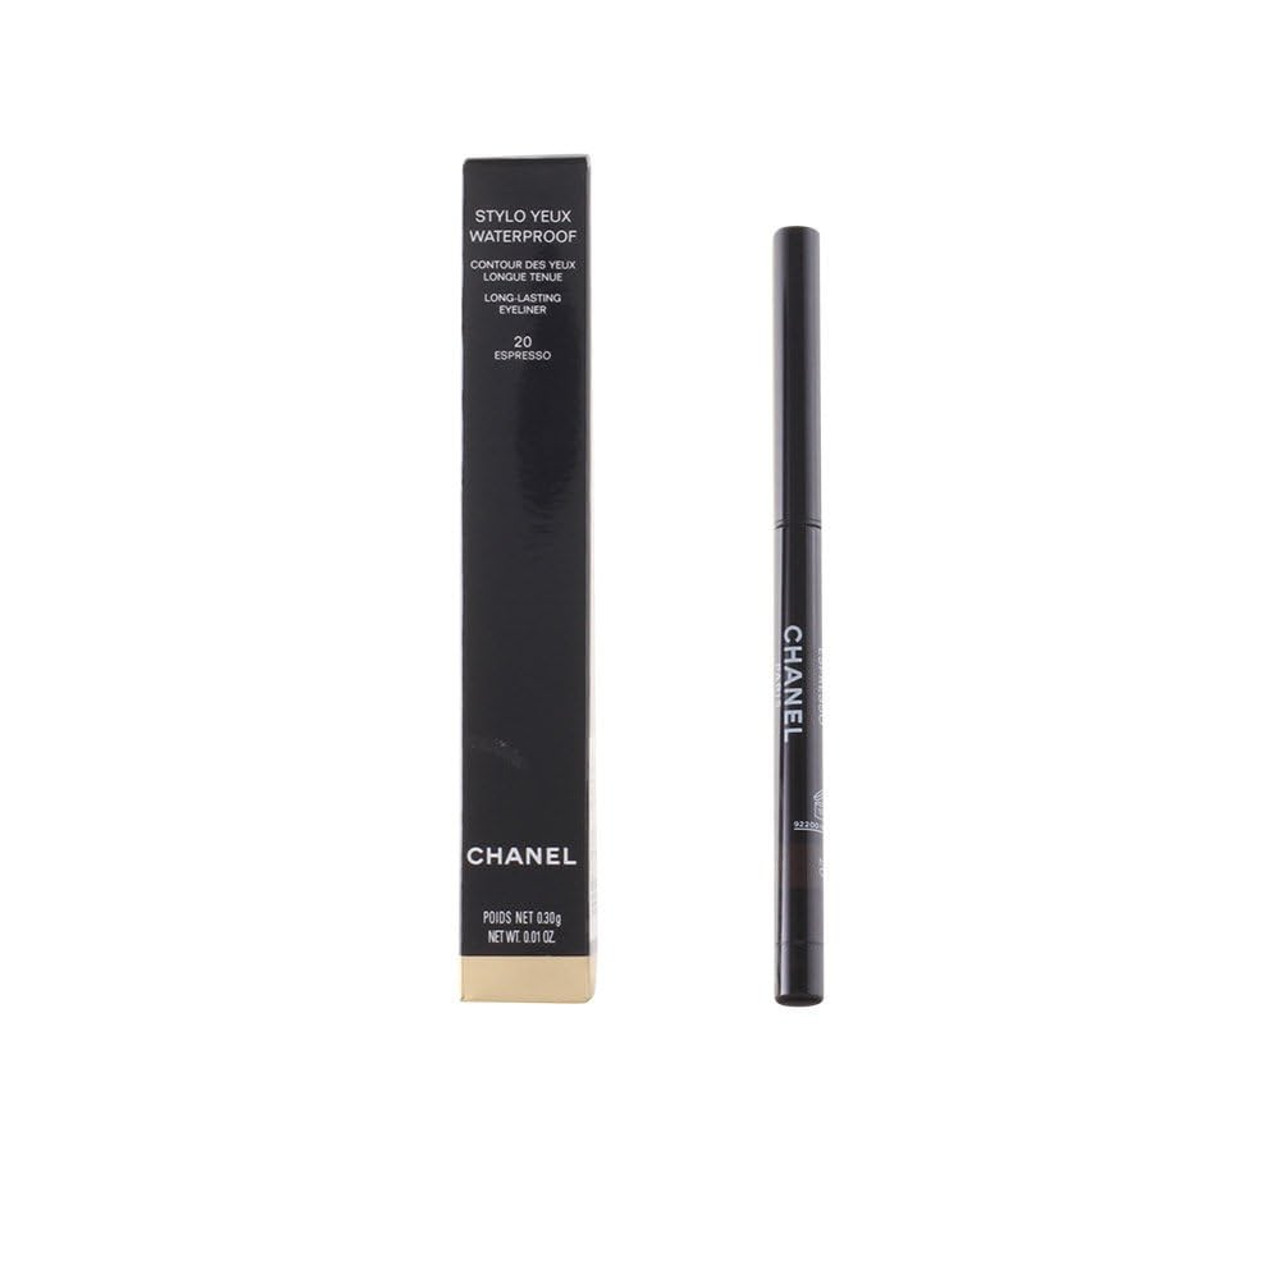 CHANEL Brow Liner Stylo Yeux Waterproof